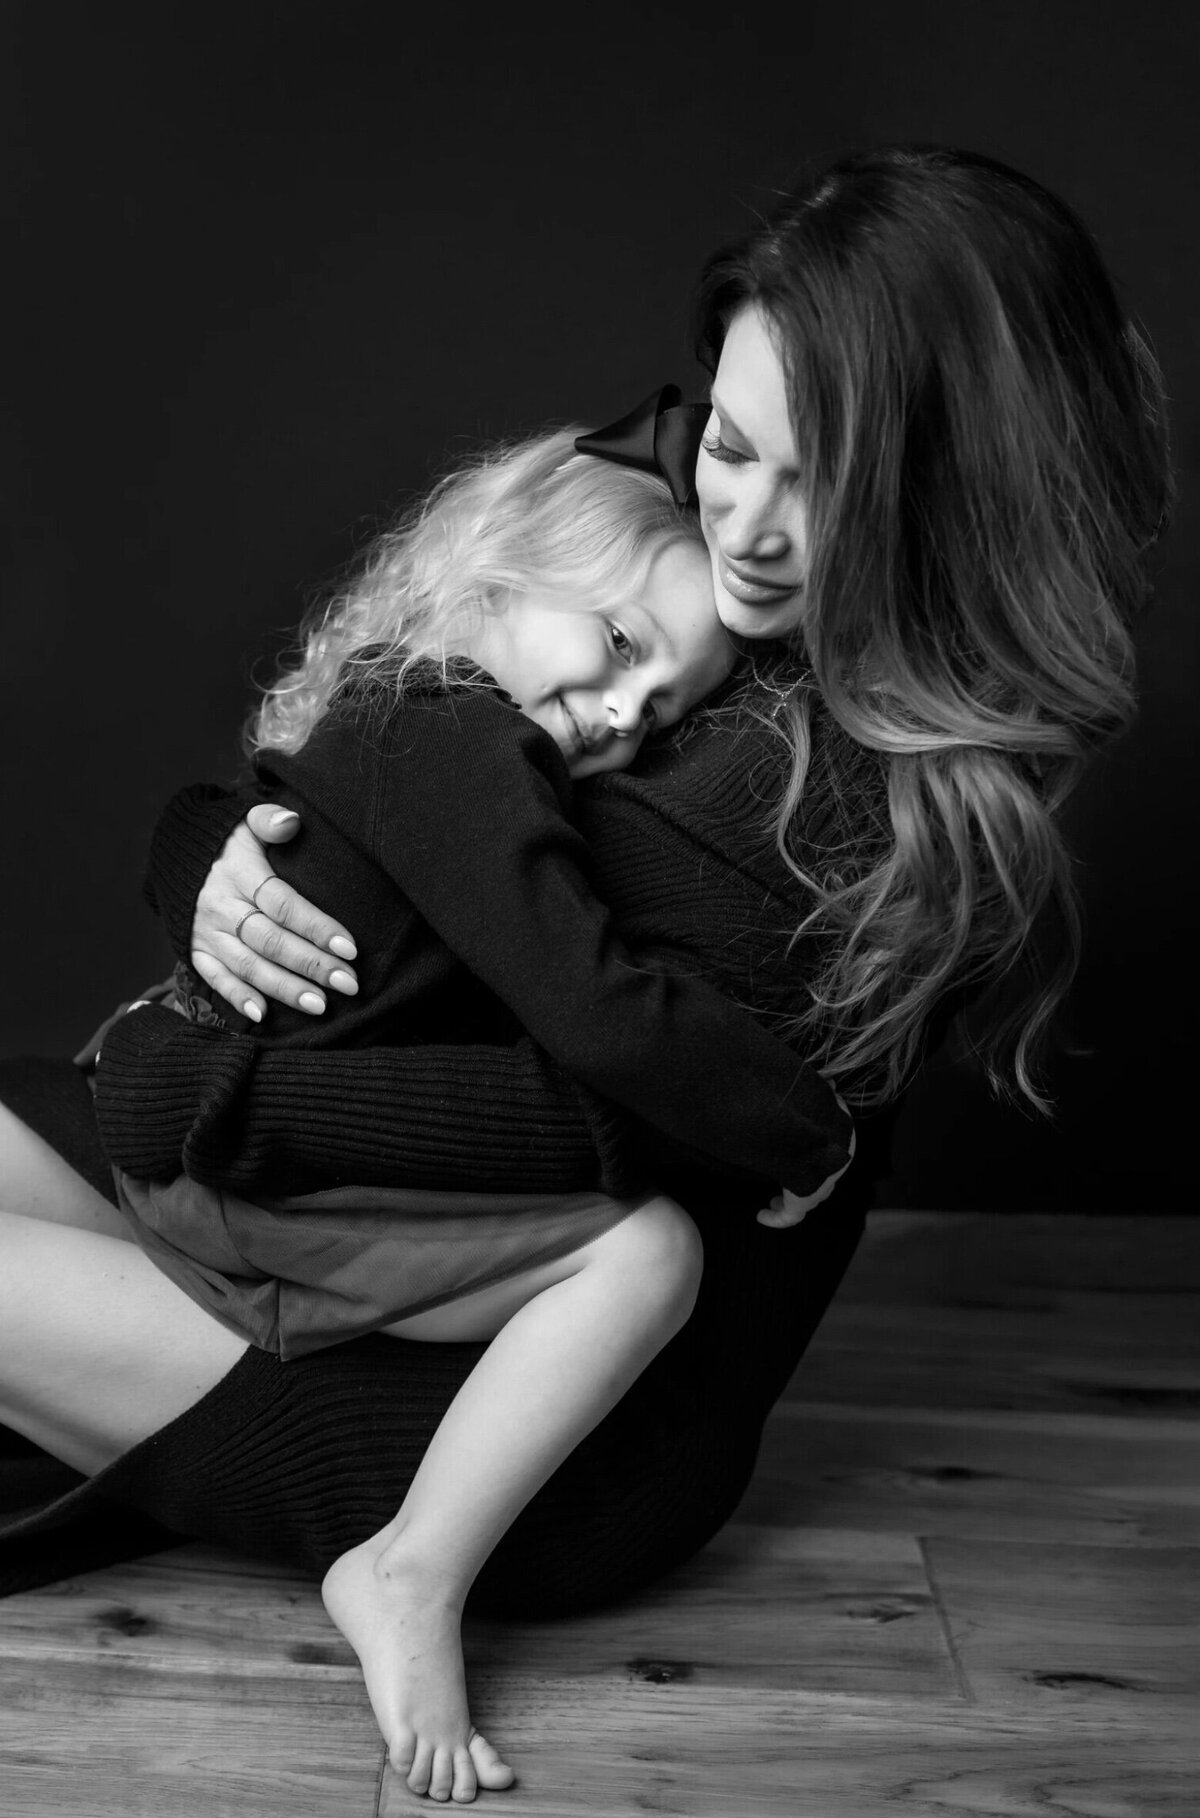 Mother holding her young daughter, both wearing black on a black background